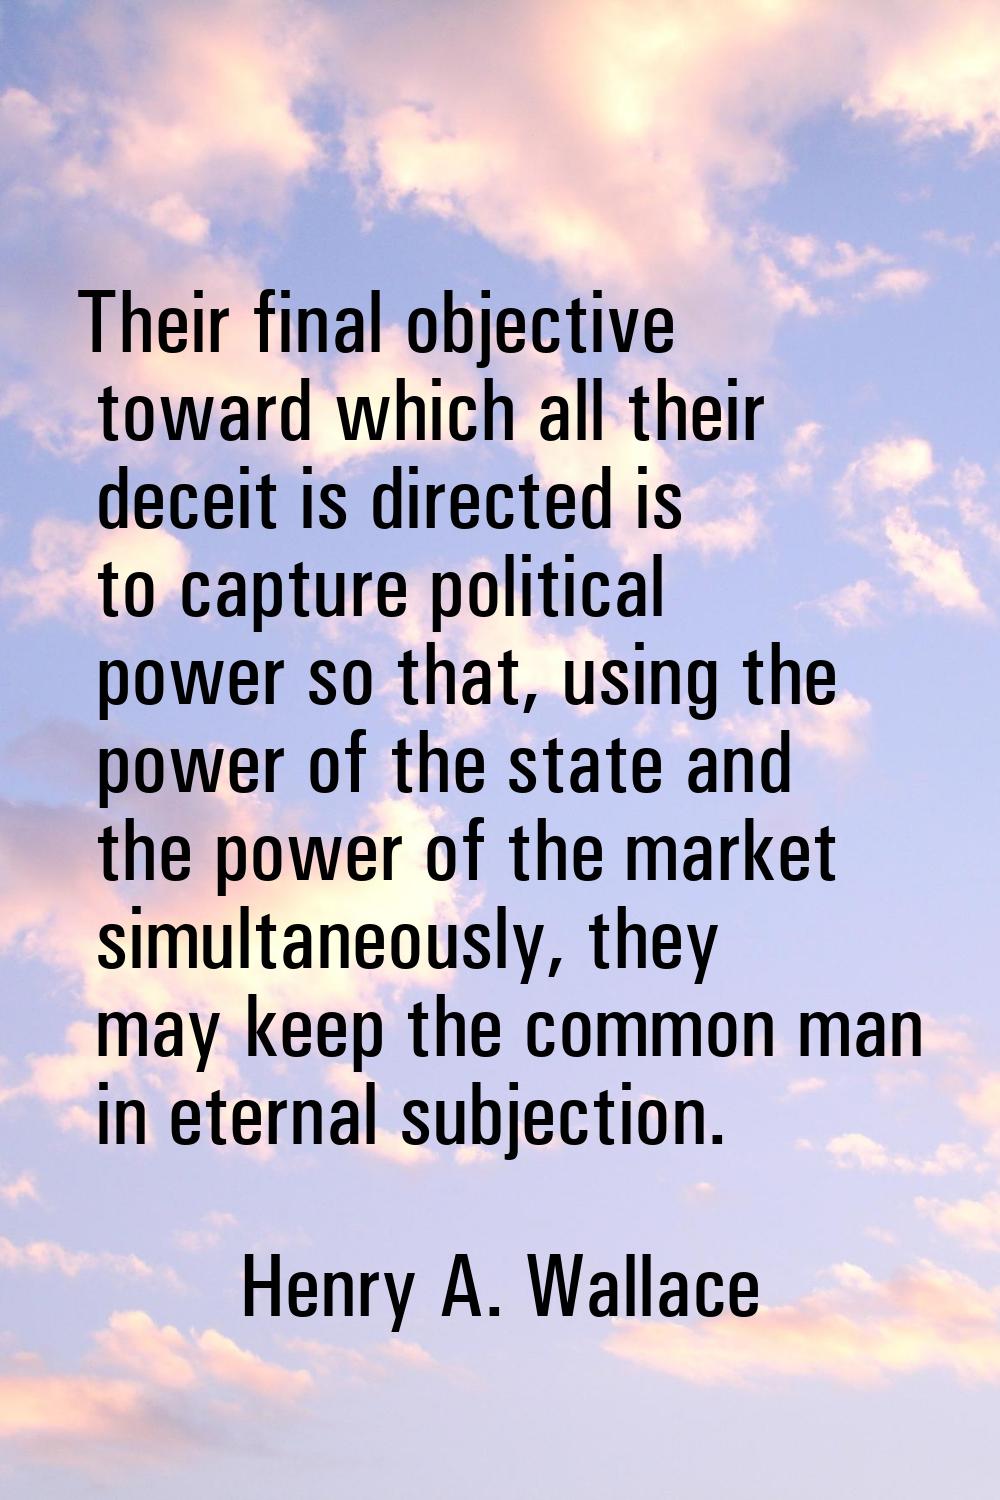 Their final objective toward which all their deceit is directed is to capture political power so th